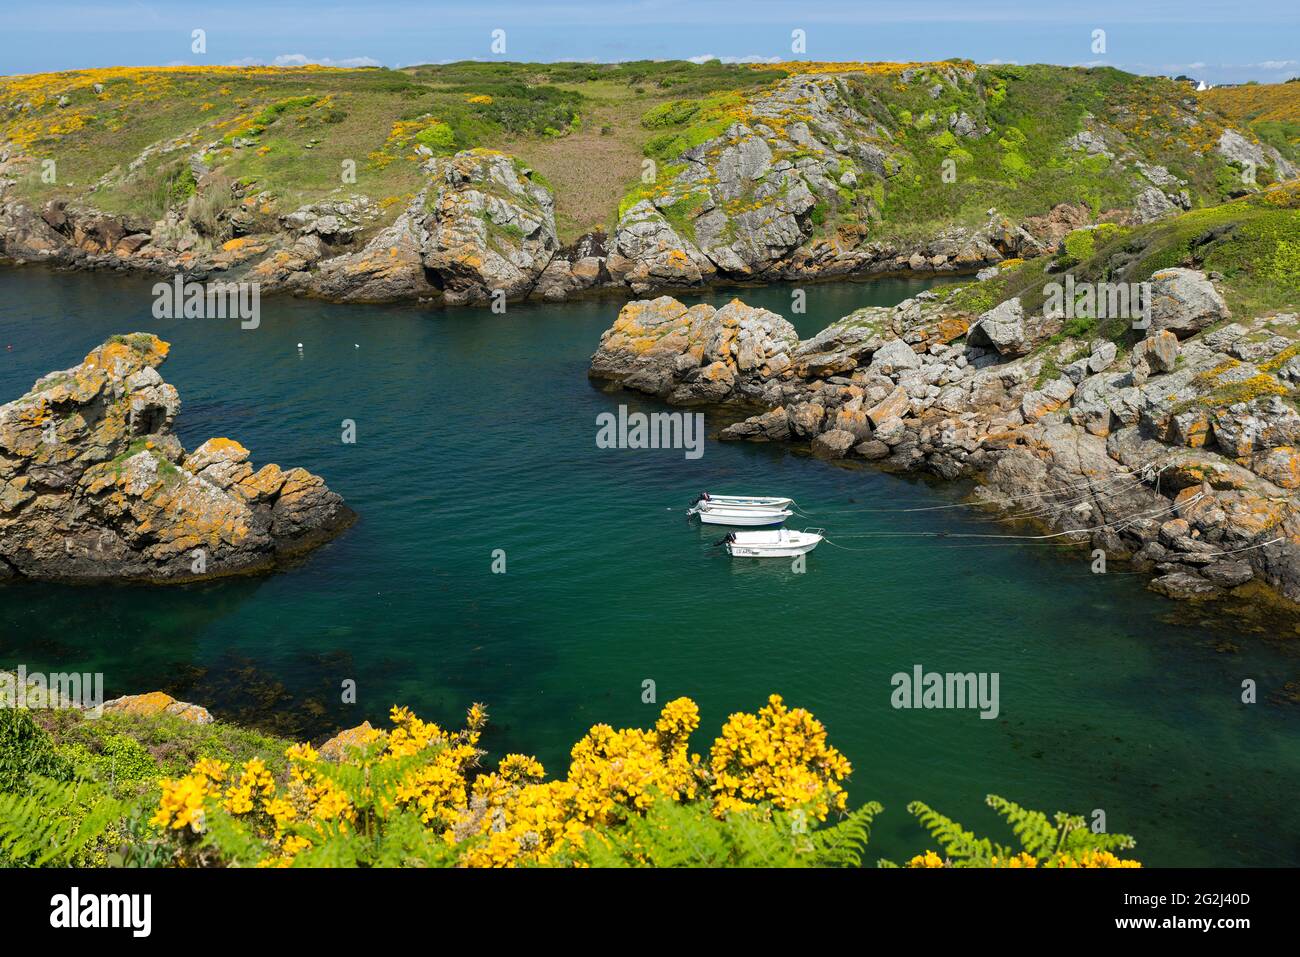 Port Saint Nicolas on the Île de Groix, boats lie in the water, gorse  blooms on the slopes, France, Brittany, Morbihan department Stock Photo -  Alamy